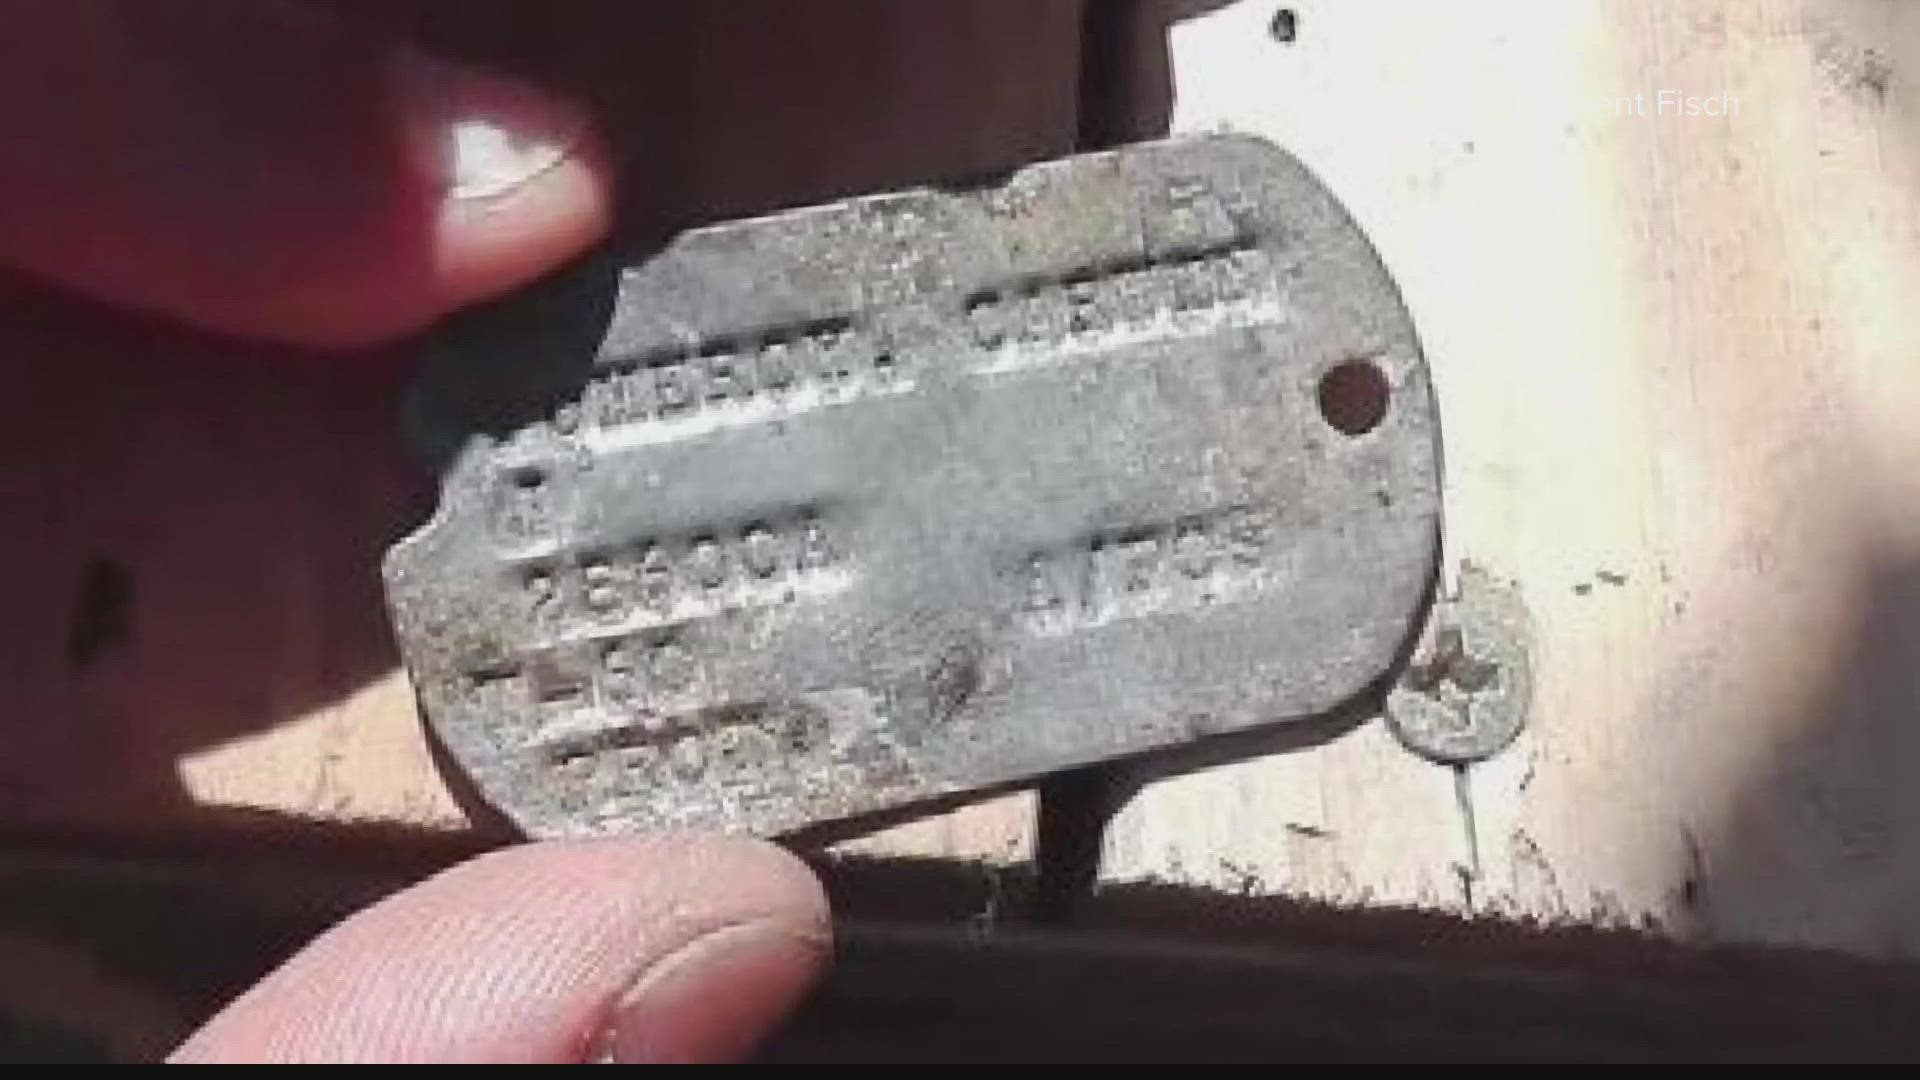 A small piece of a Mesa veteran's history has been unearthed across the Atlantic Ocean. Carwin Pomeroy's dog tags were found buried in a yard in France.